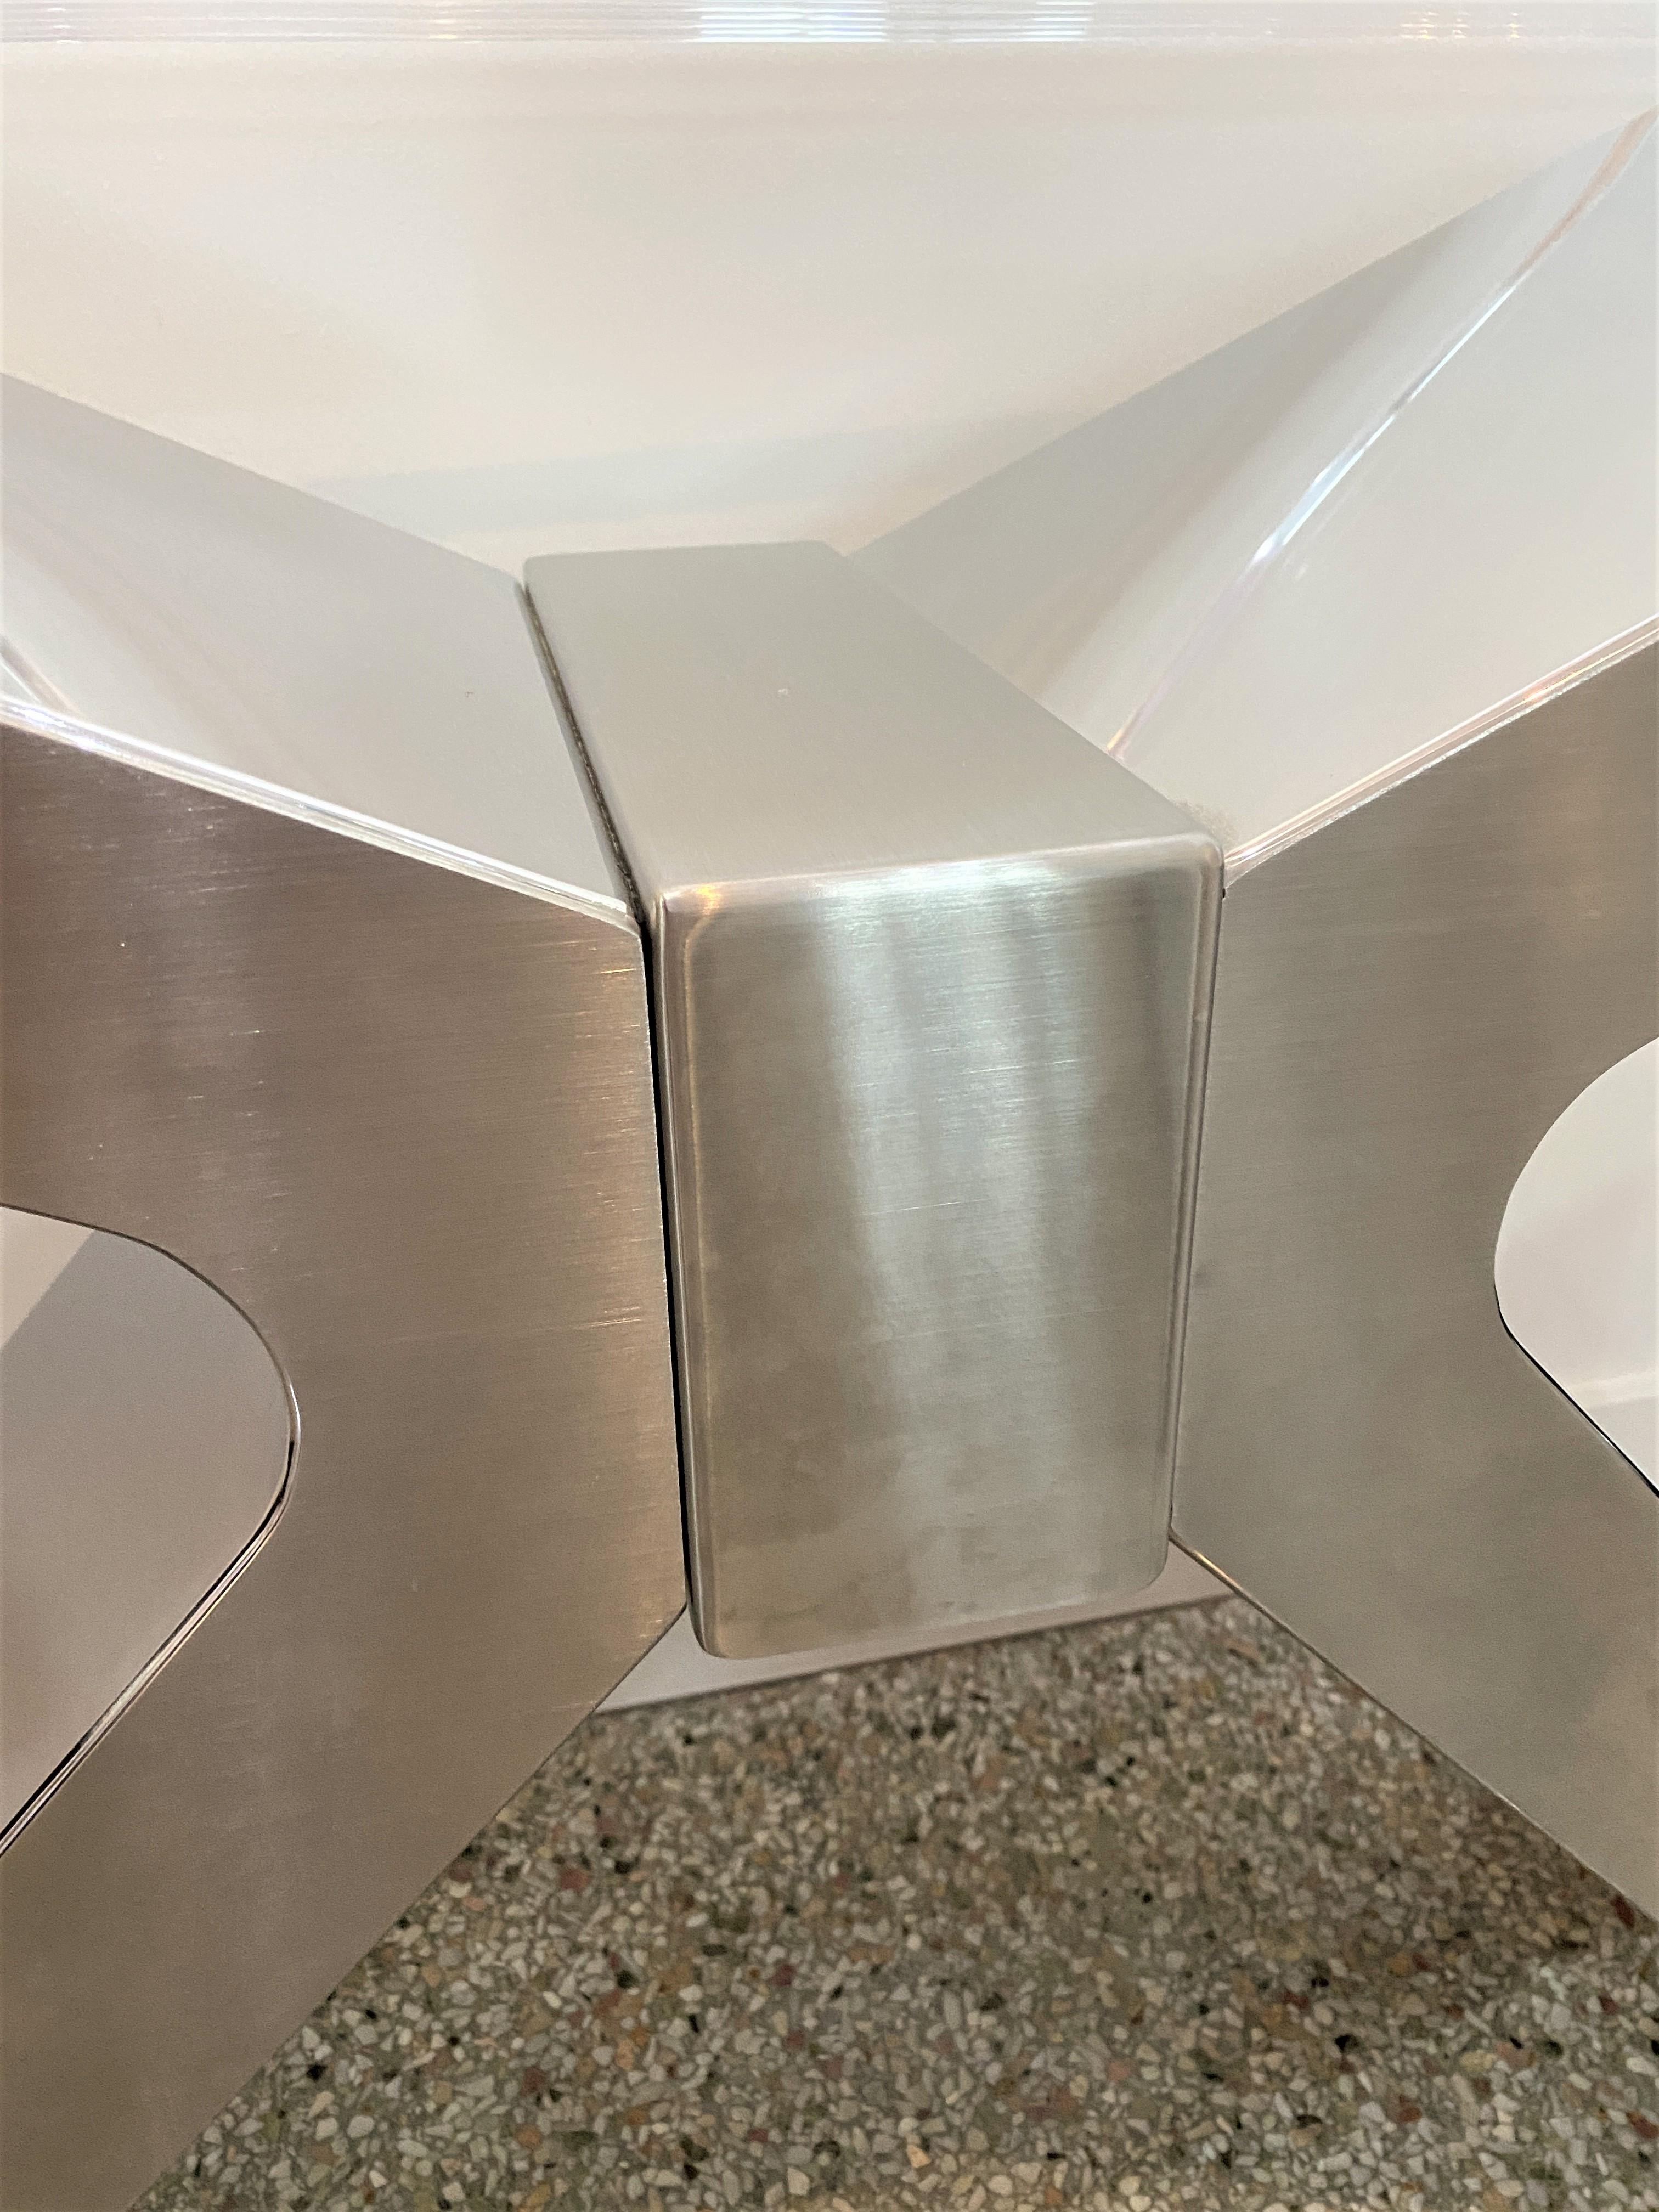 This stylish and bold X-form console table is fabricated in stainless steel and polished Lucite. The front and back of the X-form base are in a satin finish and the sides of the X-form are in a polished finish.